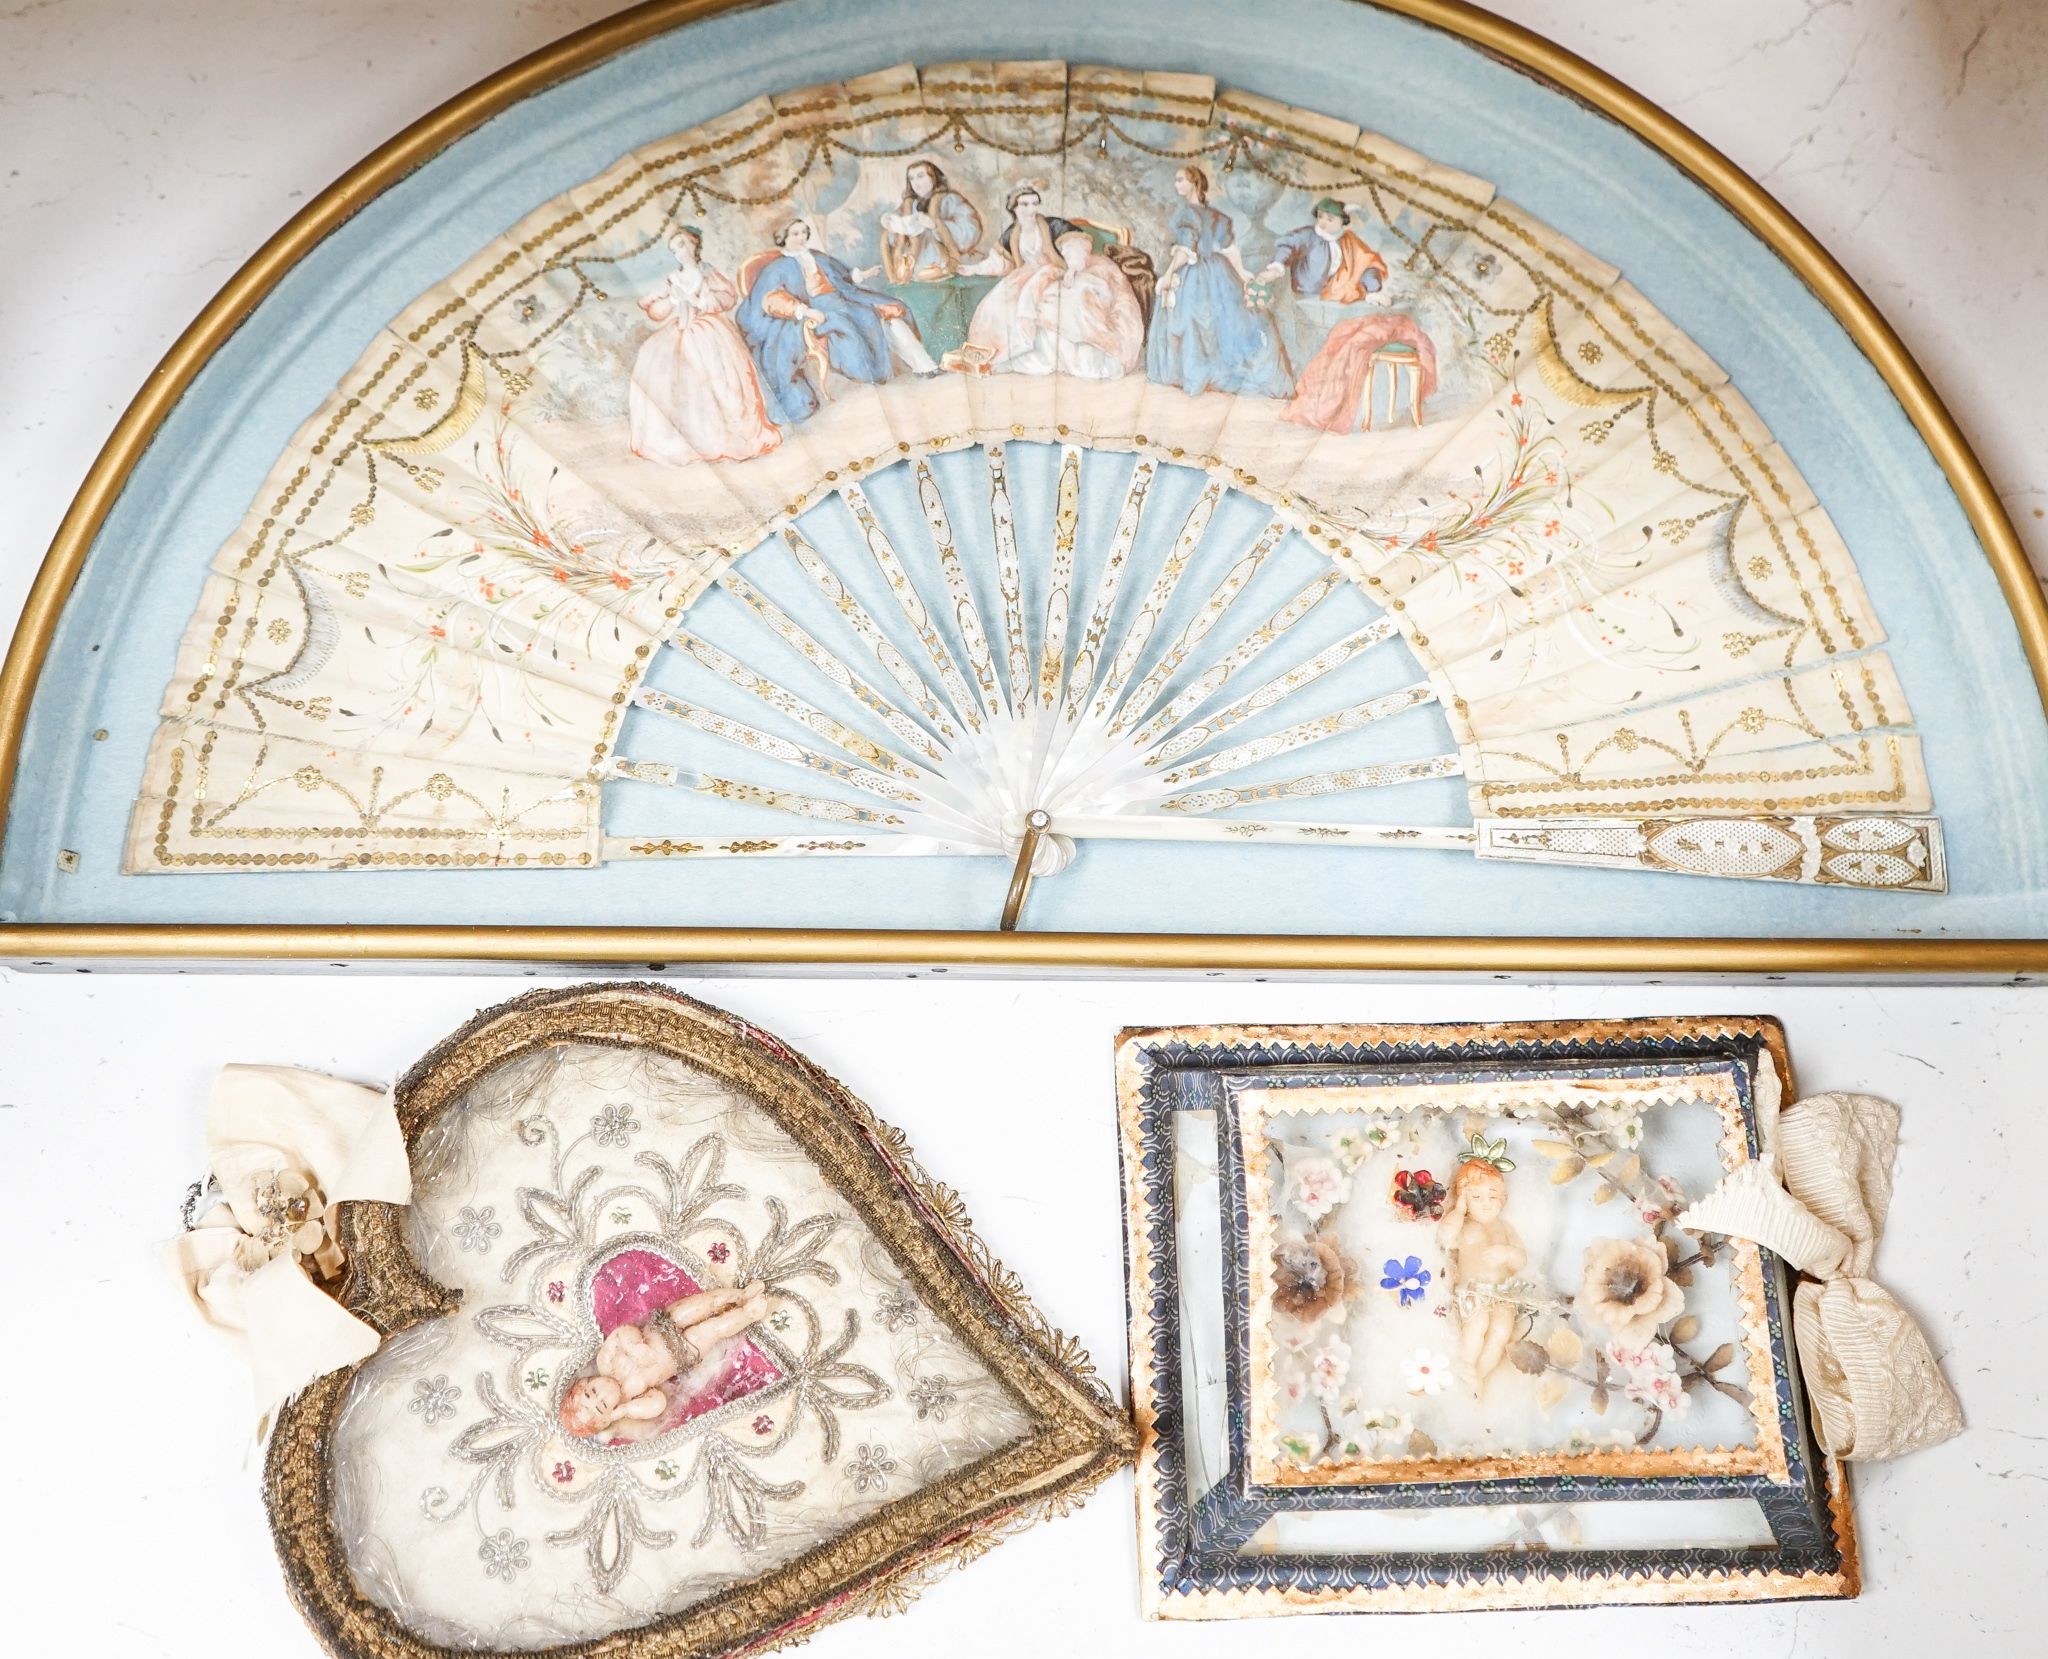 A late 18th / early 19th century Continental figurative framed fan and two religious cased effigy of baby Jesus